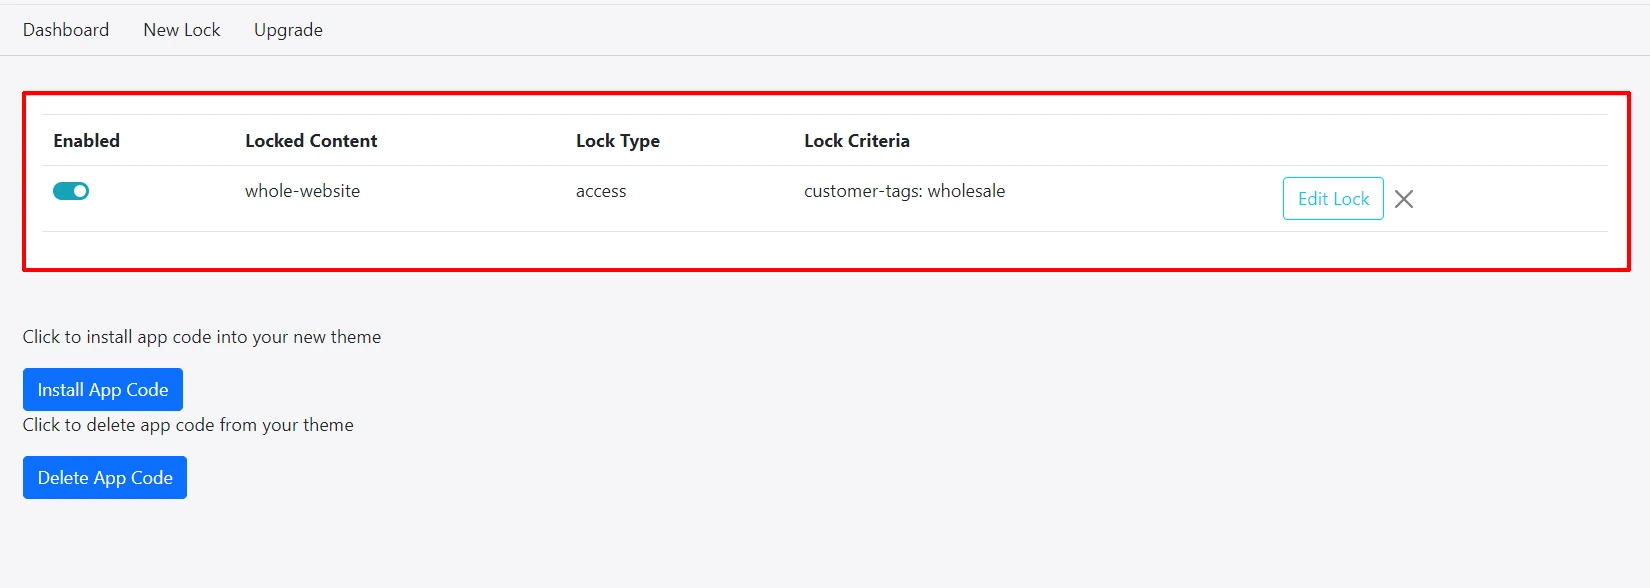 web3 sso create lock on product - enable or disable lock